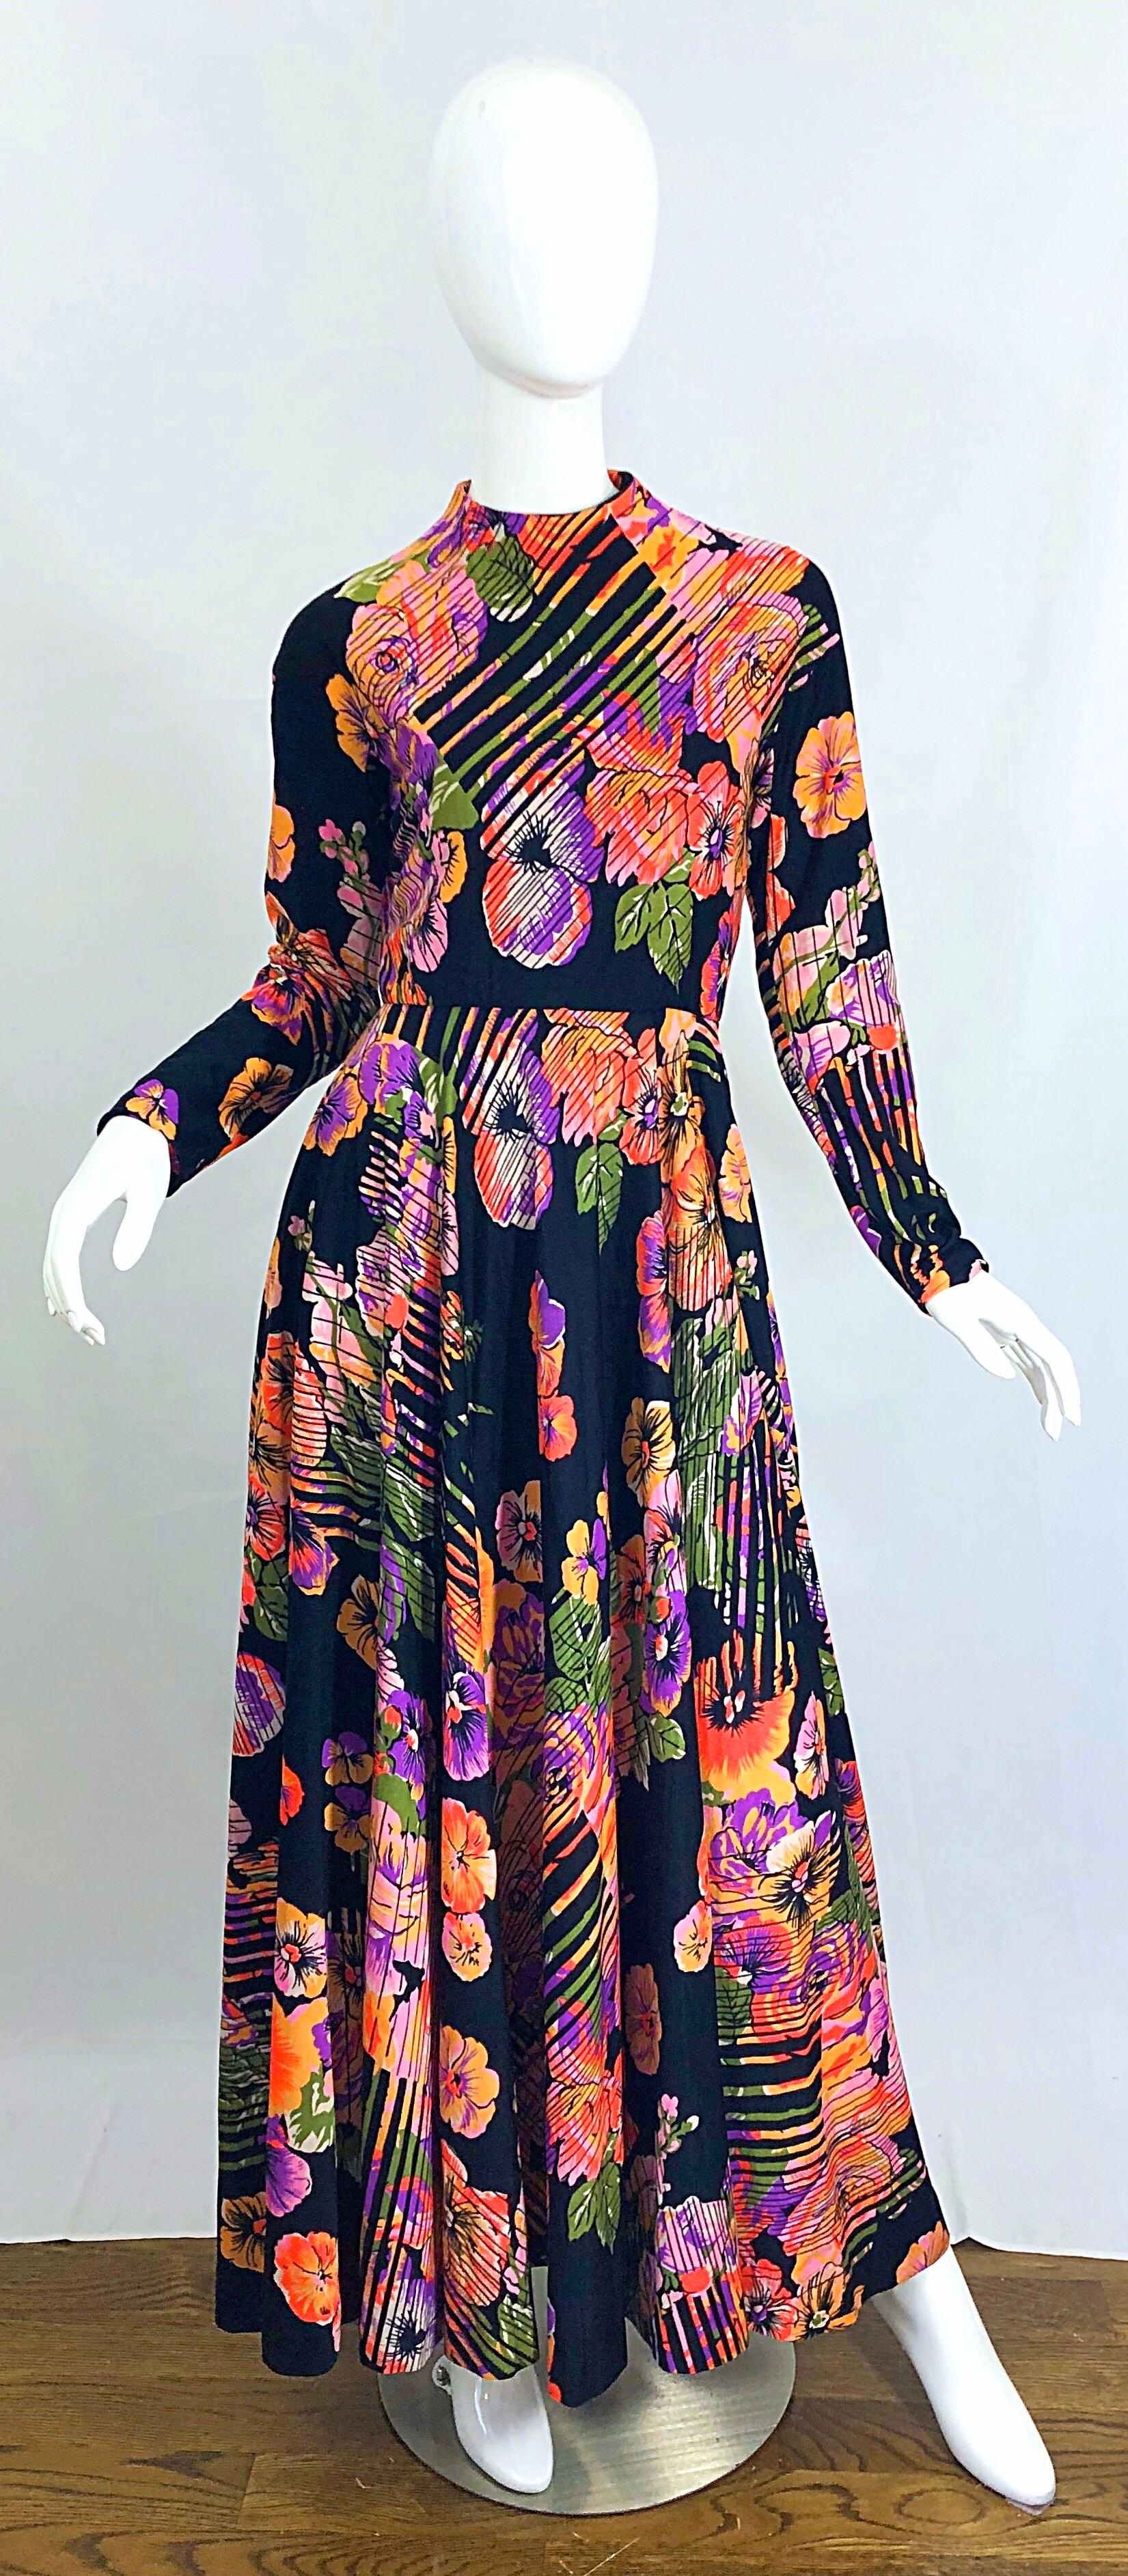 Fantastic vintage 1970s GEOFFREY BEENE abstract flower print long sleeve high neck jersey maki dress. Features floral prints in vibrant colors of purple, pink, peach, orange, green and white on a black background. Super soft double ply jersey